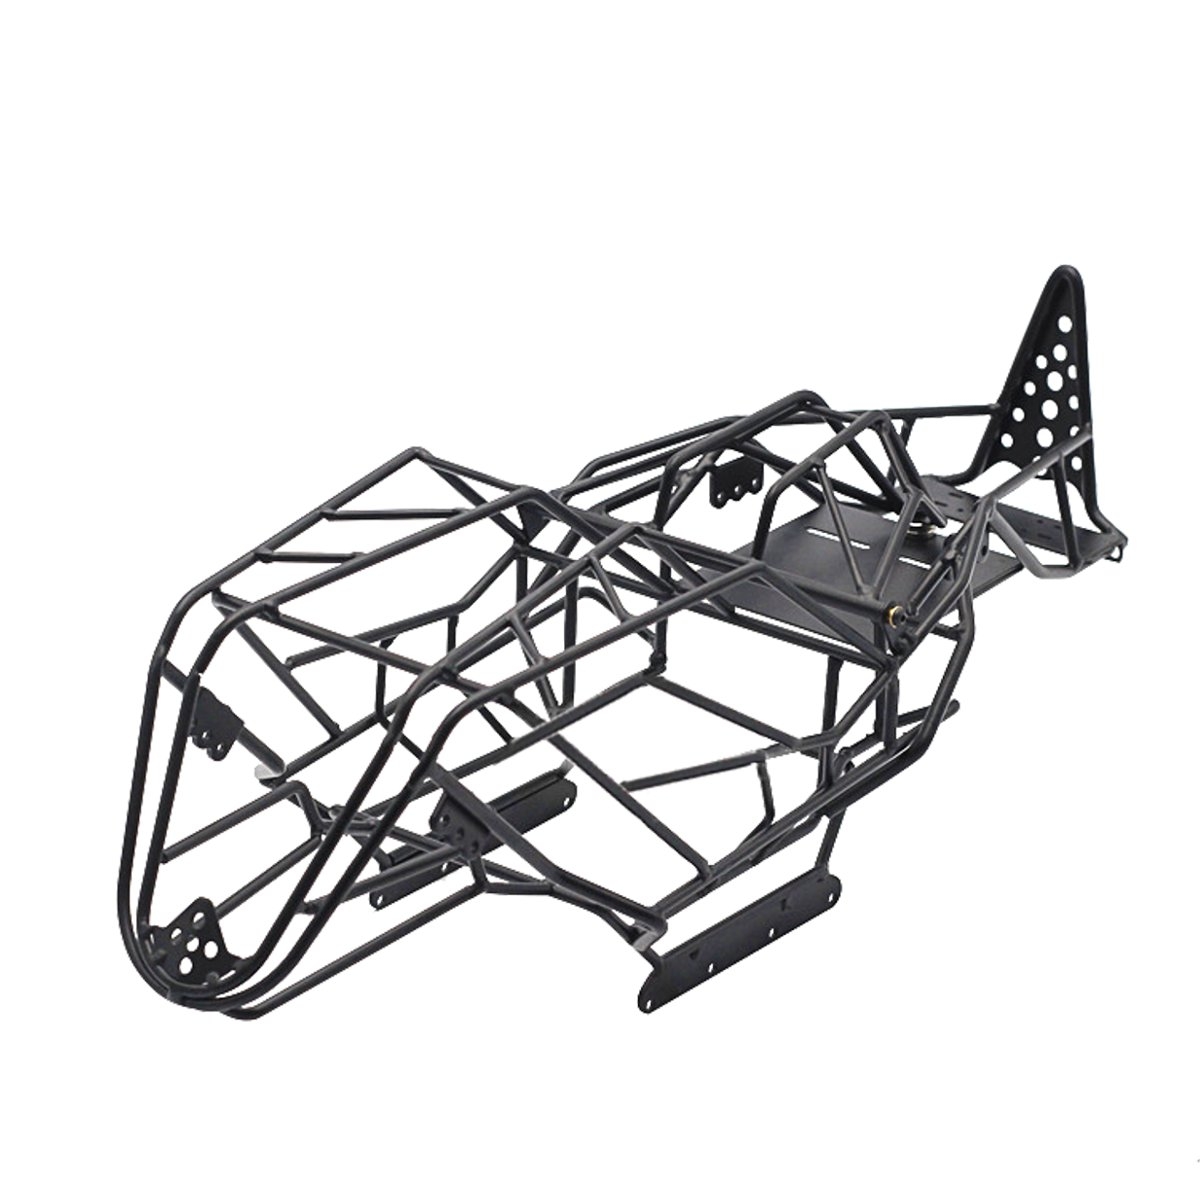 Steel Roll Cage Body Frame for 1/10 Axial Wraith Crawler Truck RC Car Parts